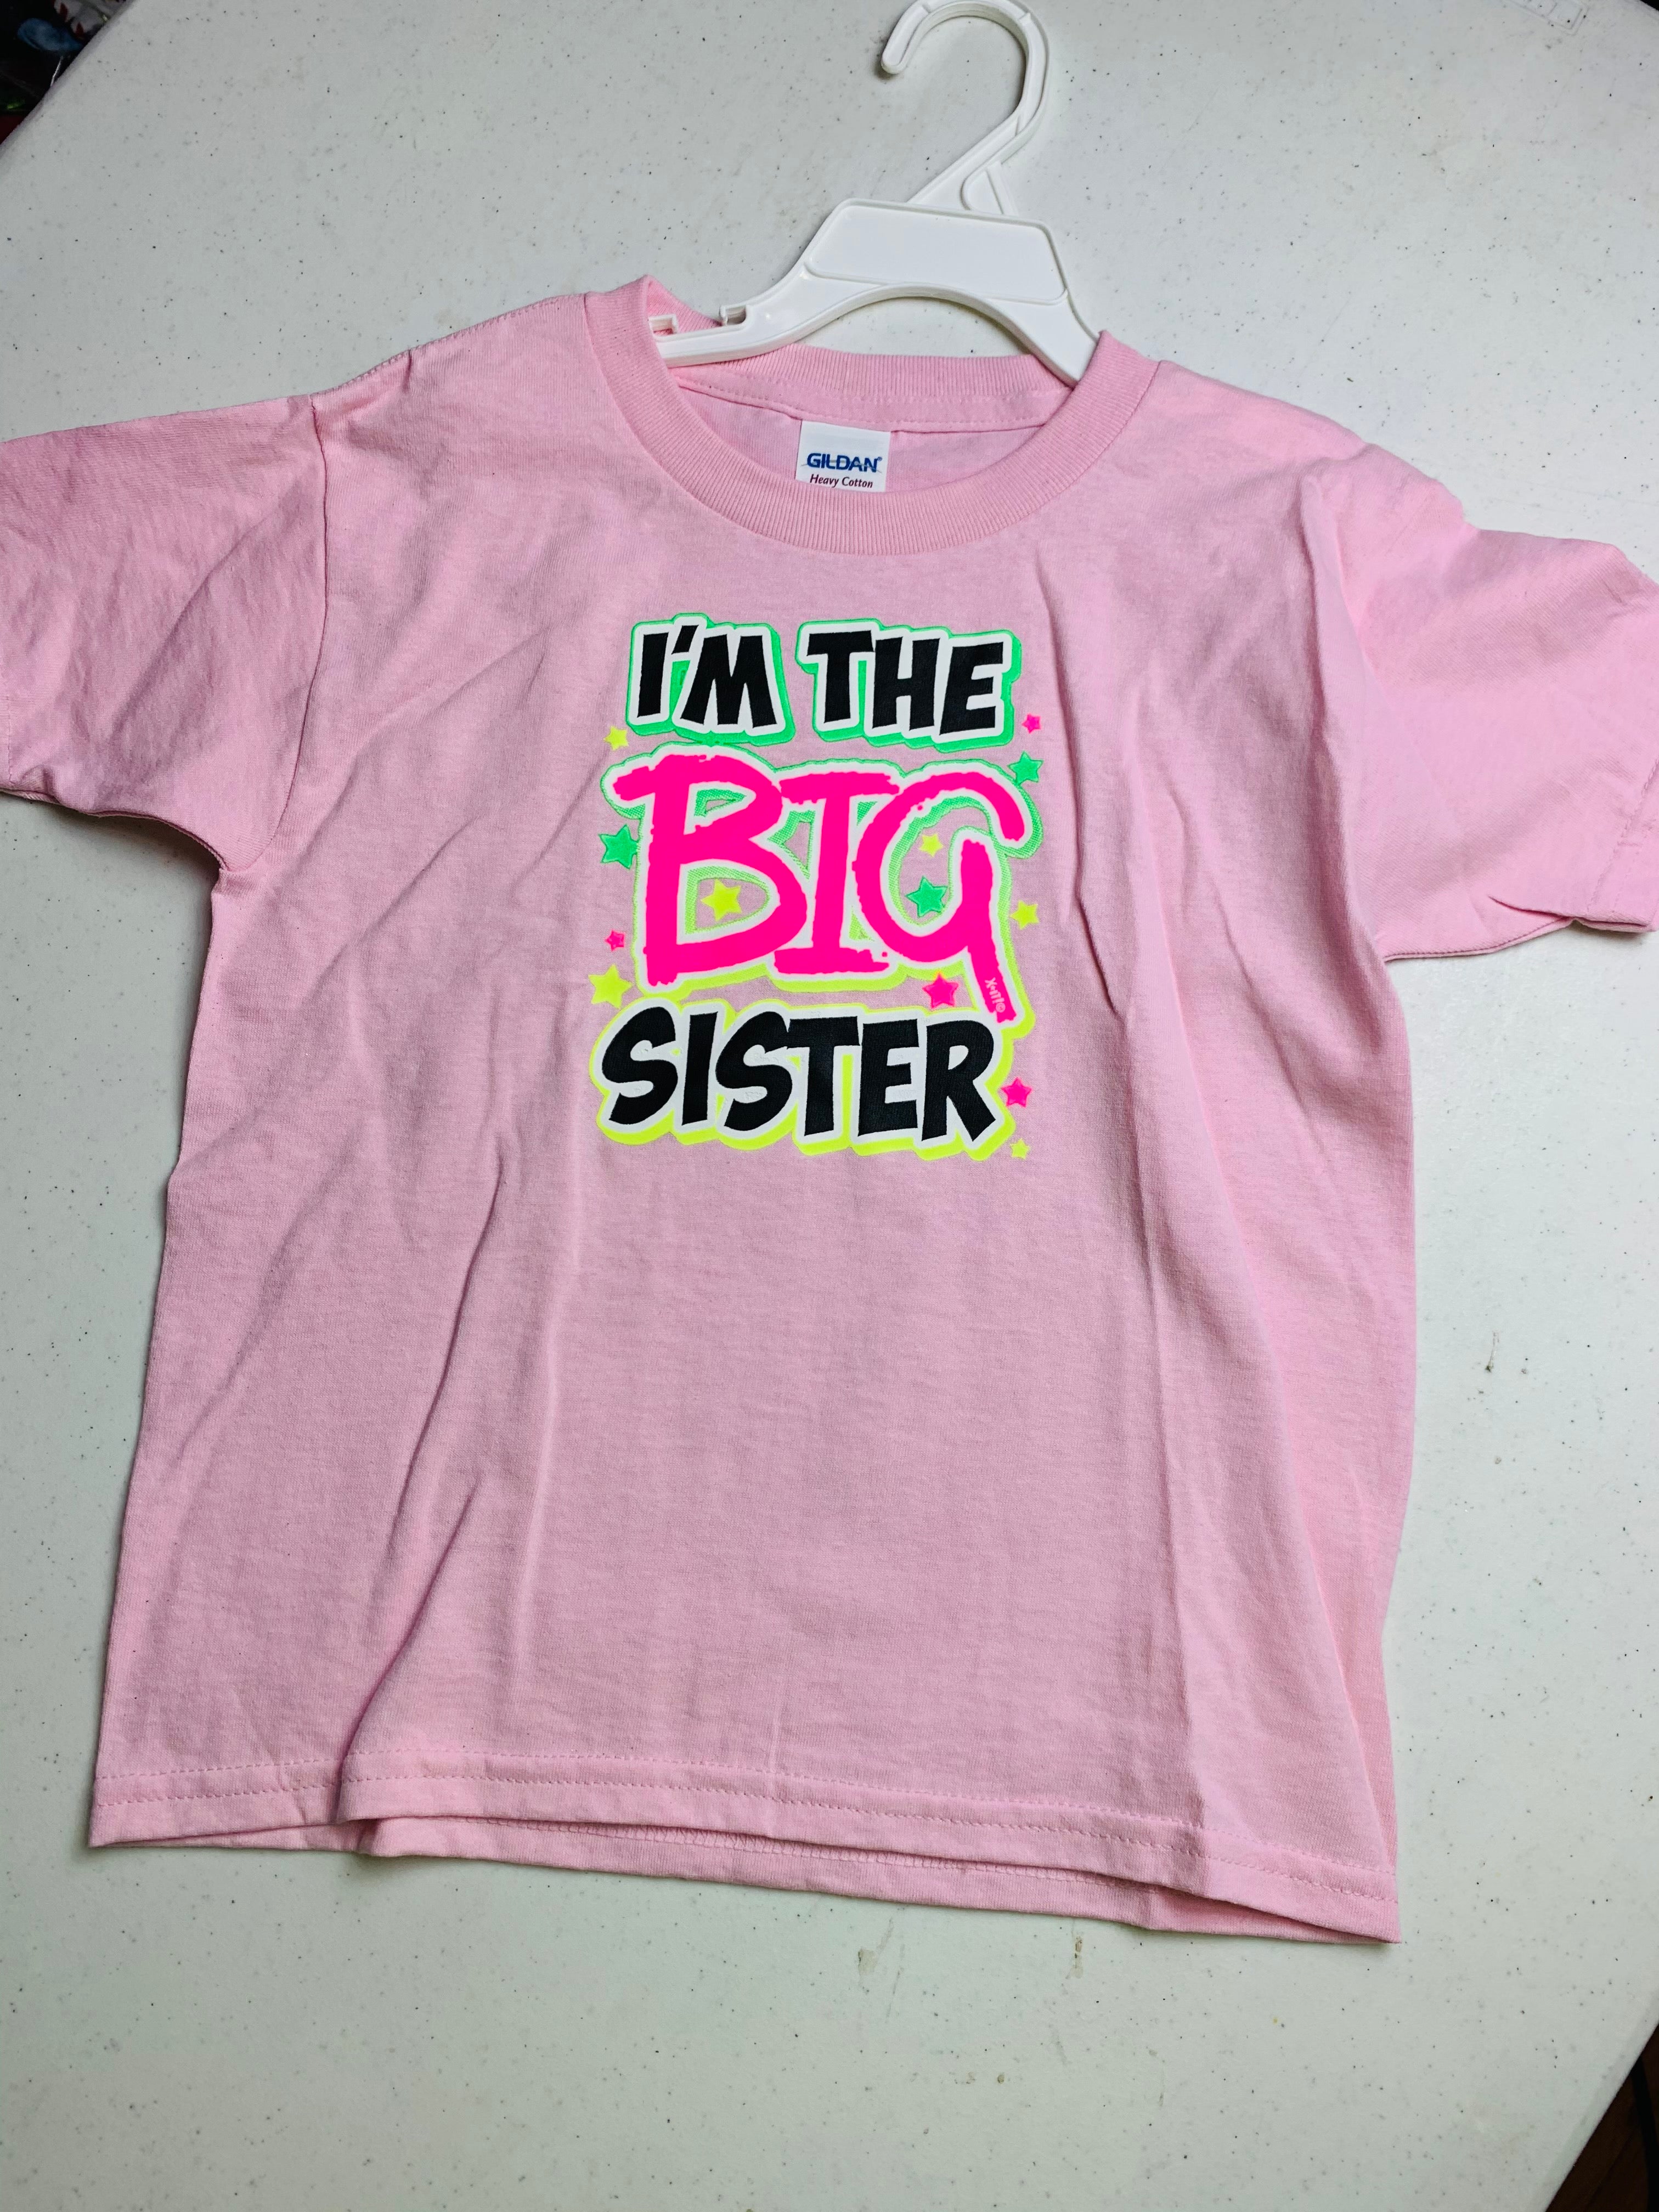 Resell NEW no tags "I'm the Big Sister" 6T🧵